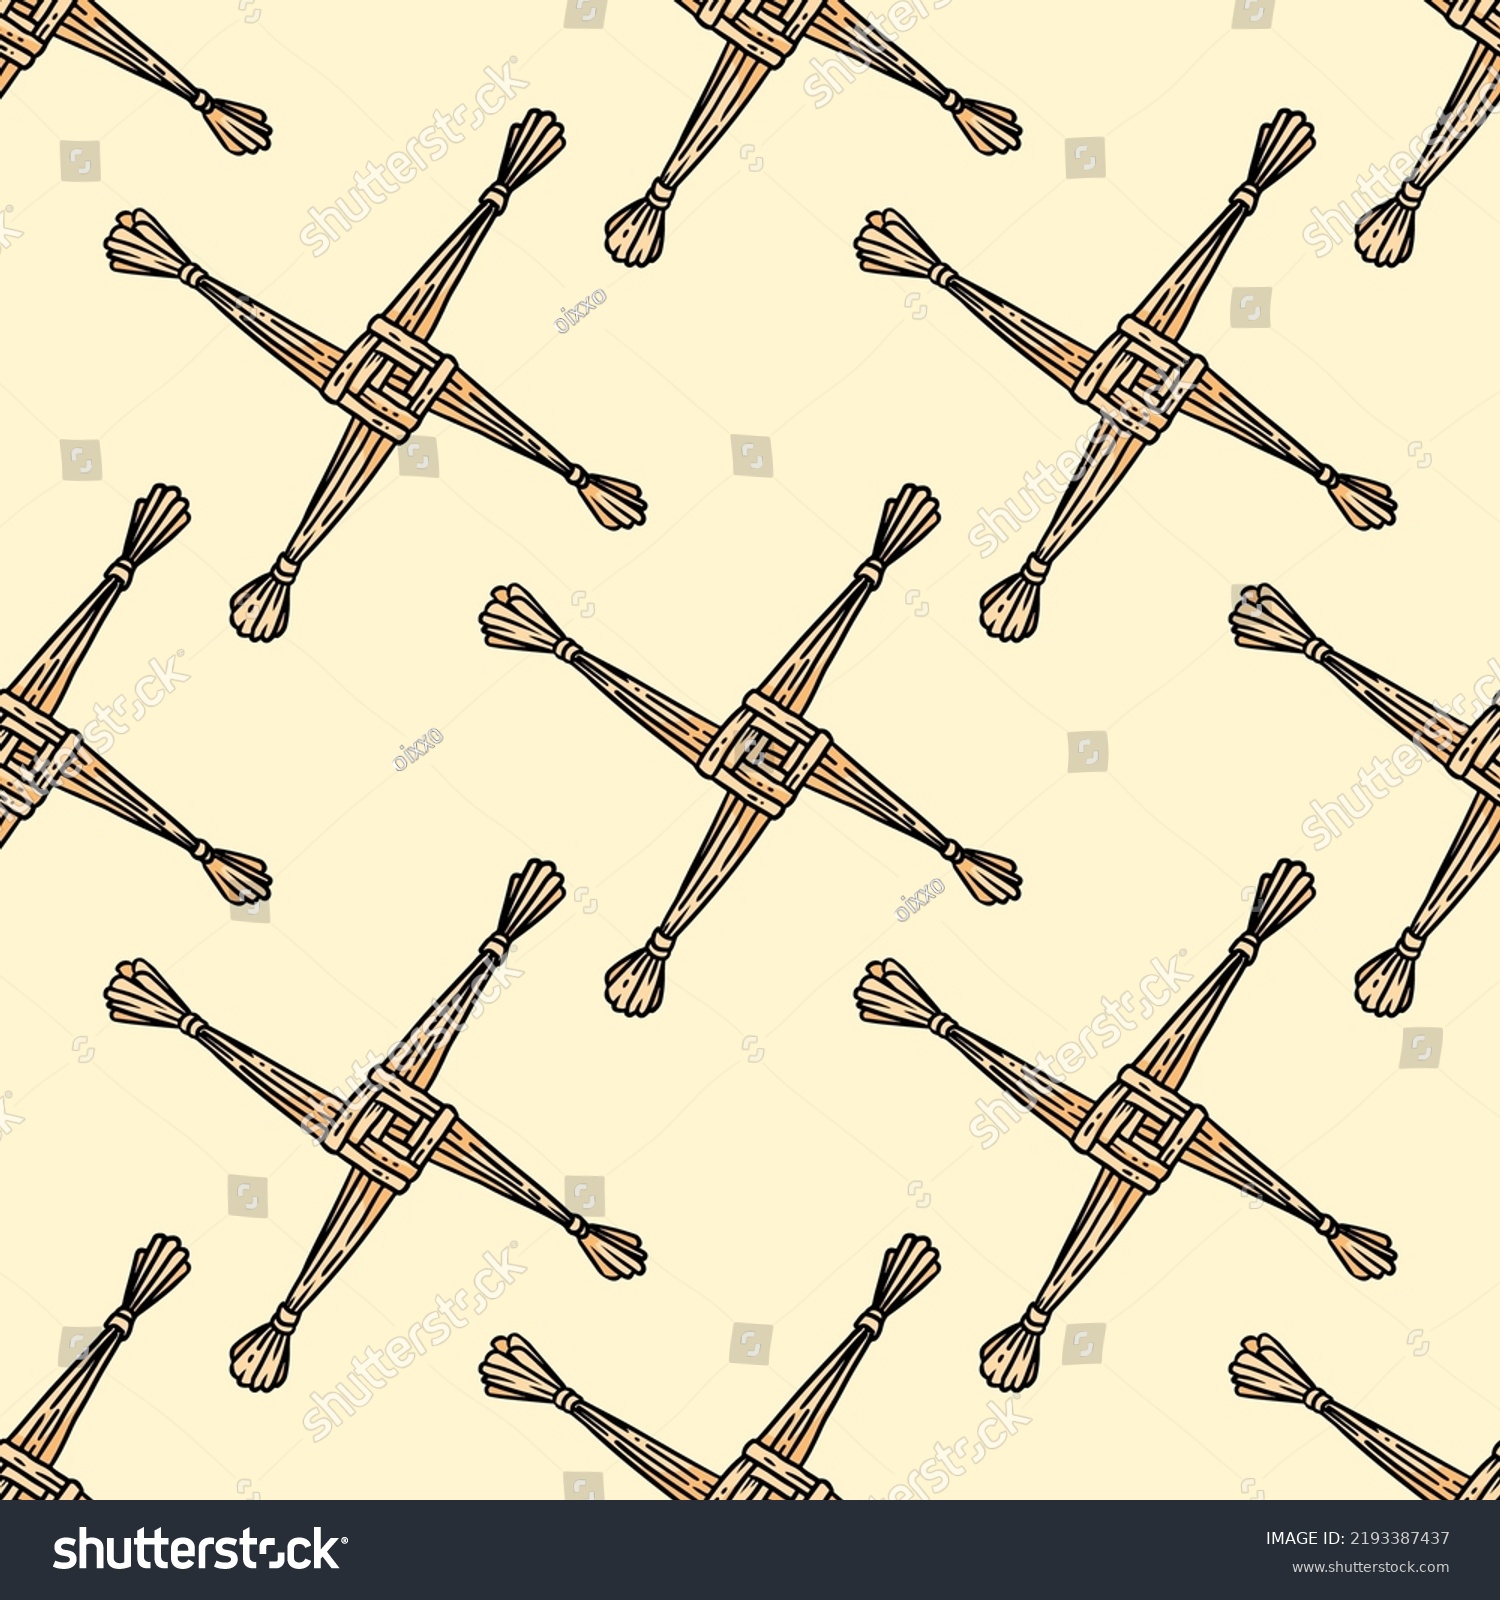 SVG of Brigid's Cross made of straw hand-drawn seamless pattern. Wiccan pagan print background. Stock texture tile svg